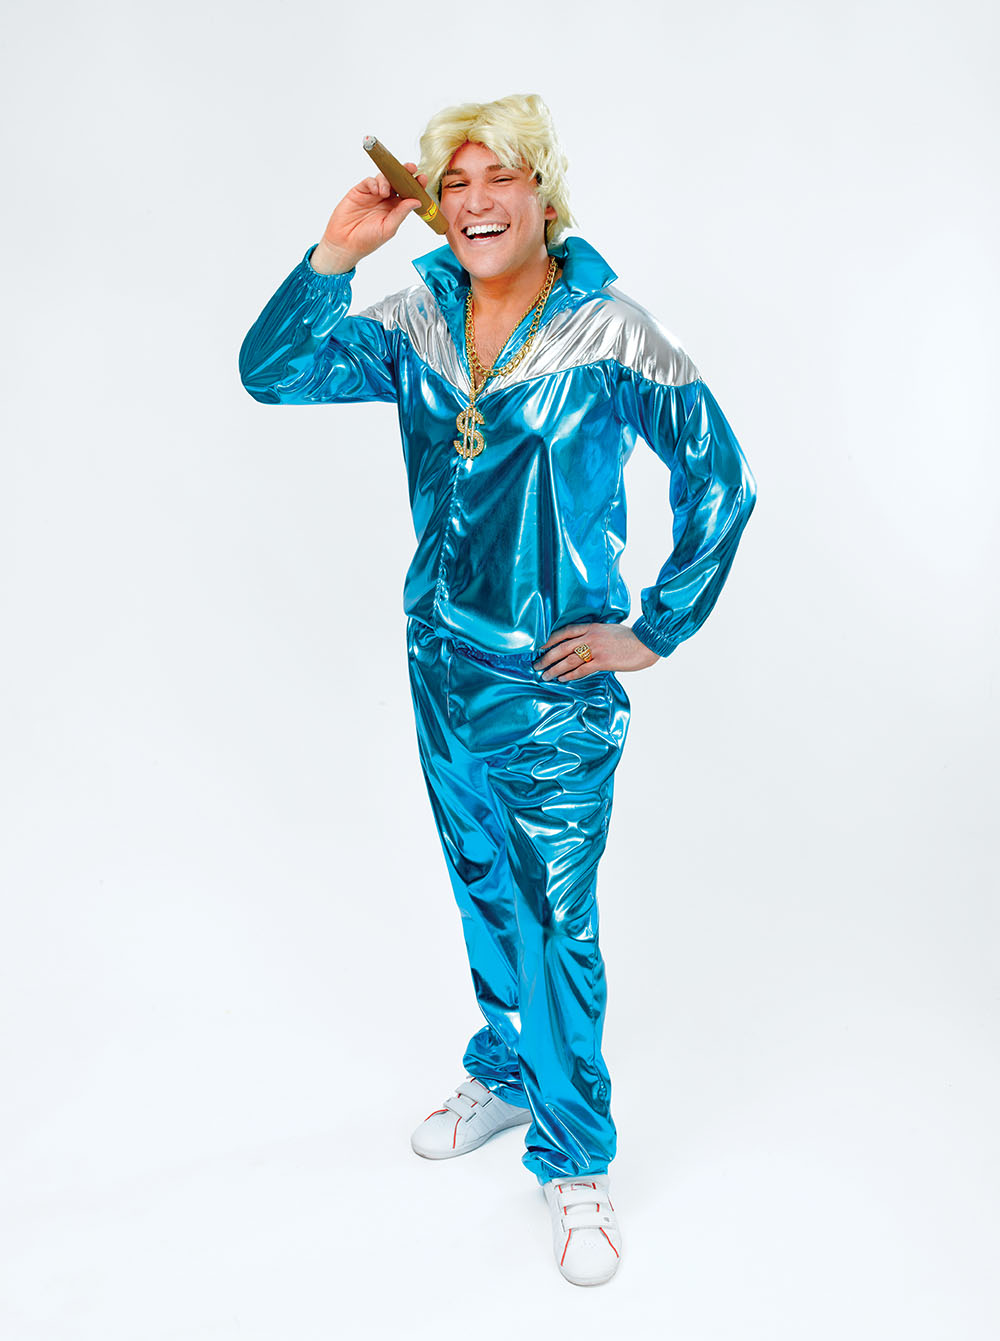 Shell Suit. Men's Turquoise